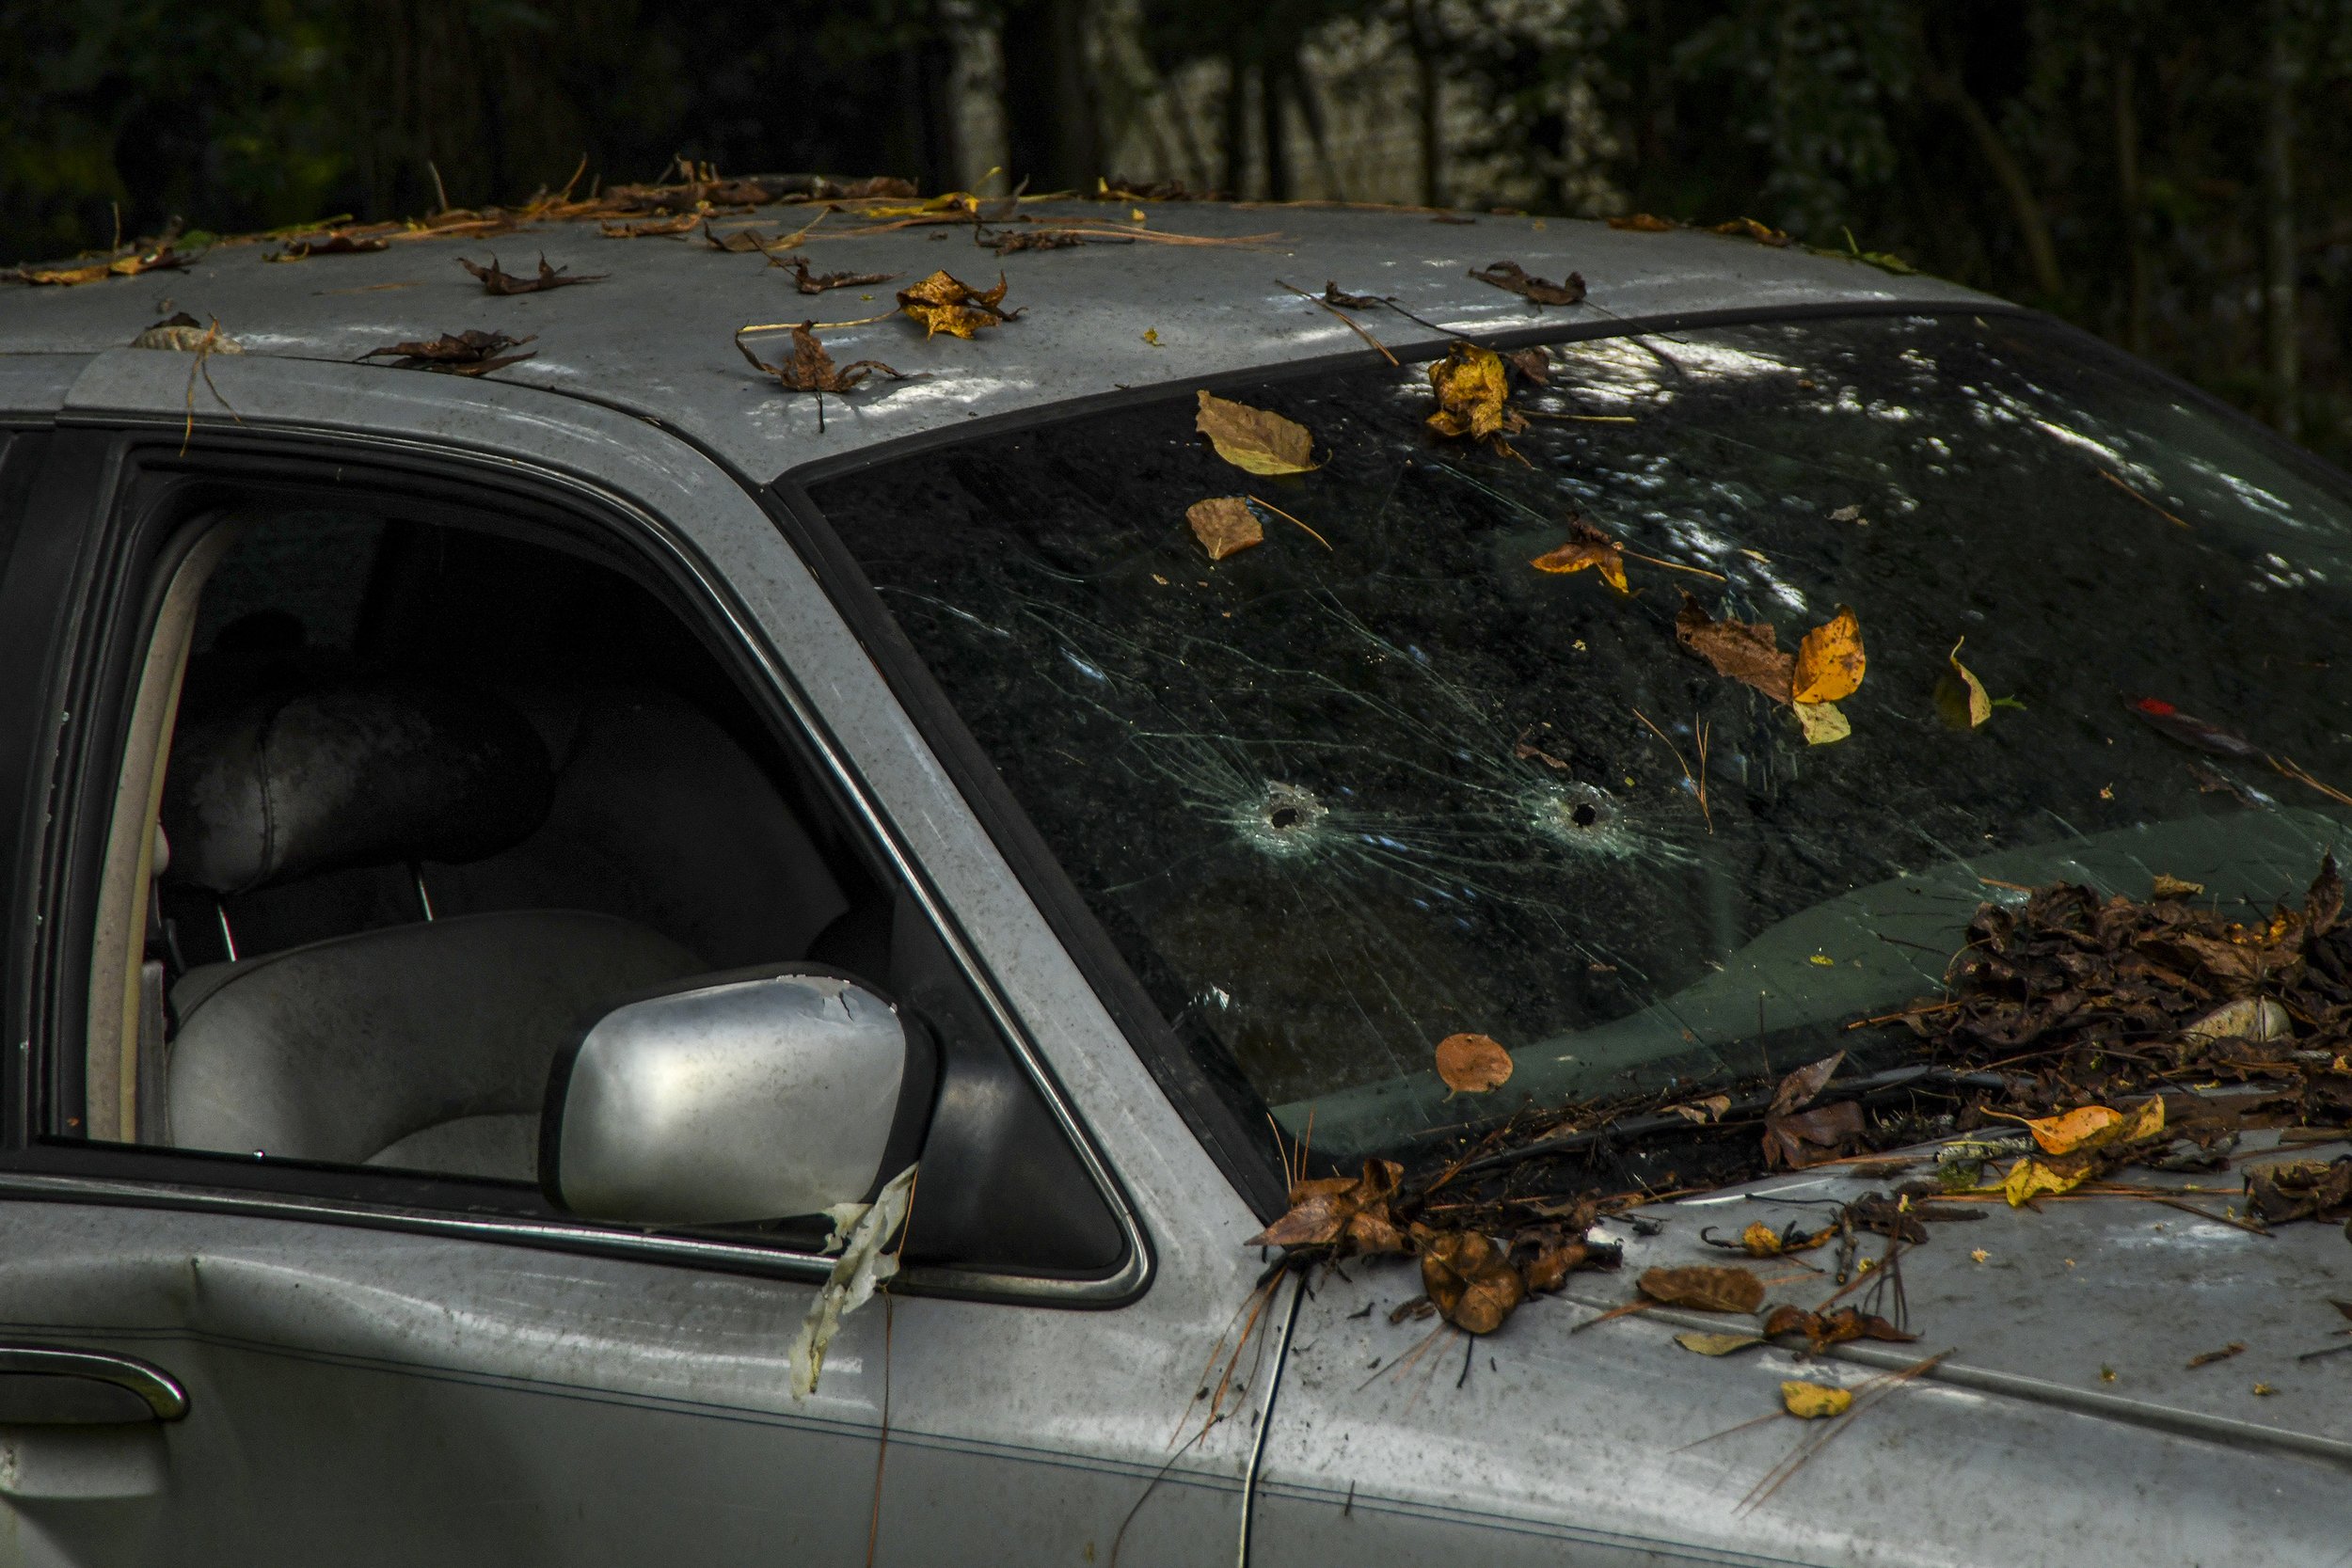  Cedric Jamal Mifflin’s bullet-riddled vehicle at the home of his close friend, Giovanni Fleur in Phenix City, Ala., Oct. 7, 2021. Mifflin, a young unarmed black man was shot at 15 times by Michael Seavers a Phenix City police officer, killing Miffli